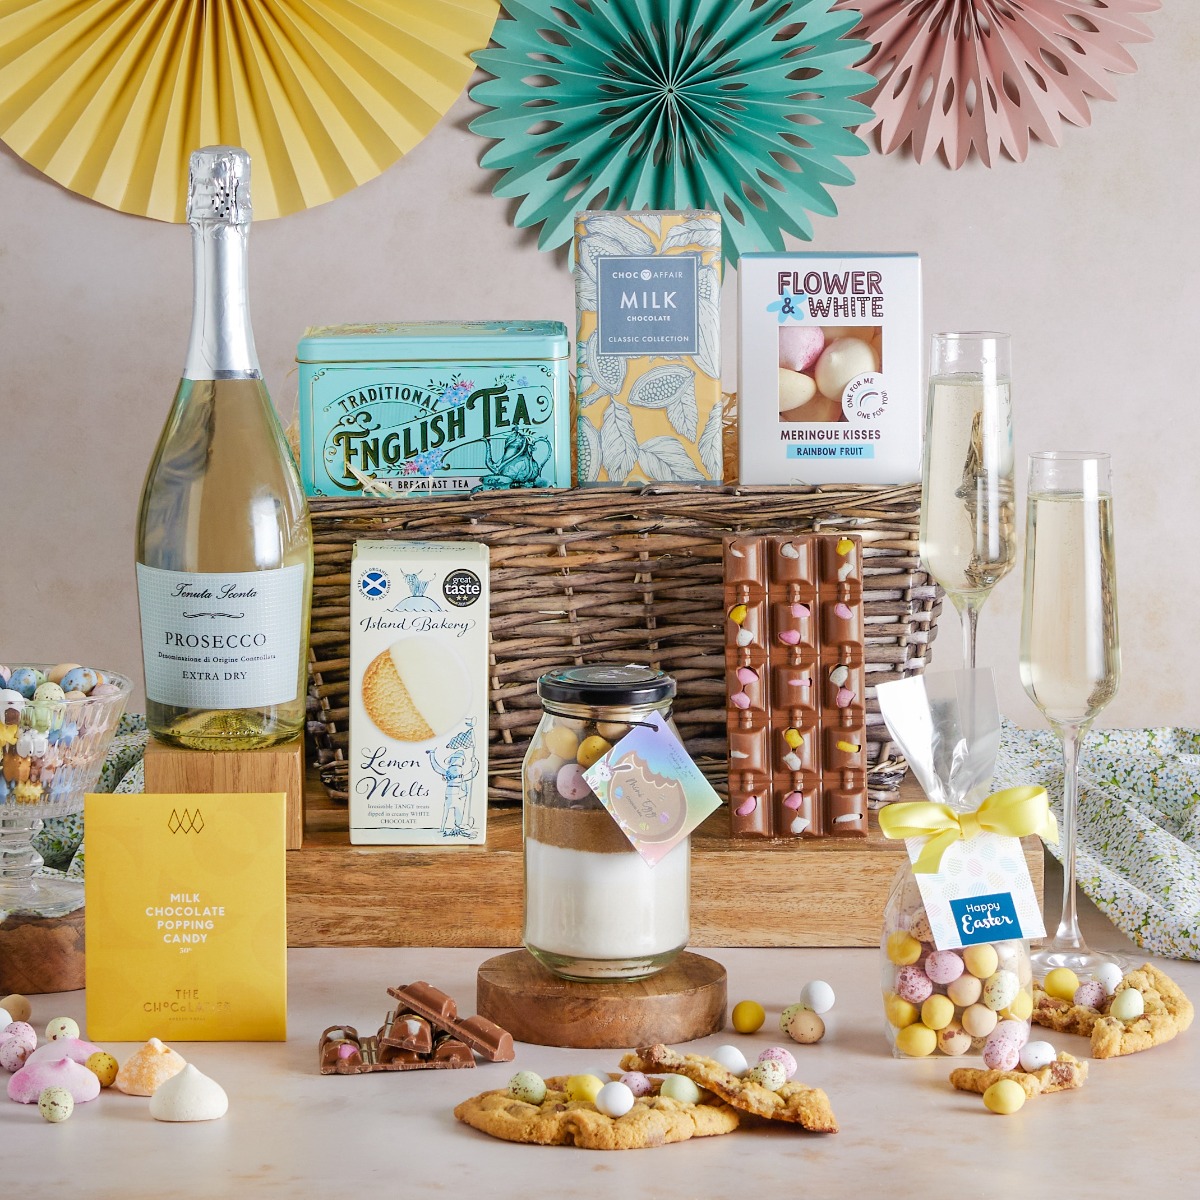 Easter Egg Sharing Basket with Prosecco contents on display